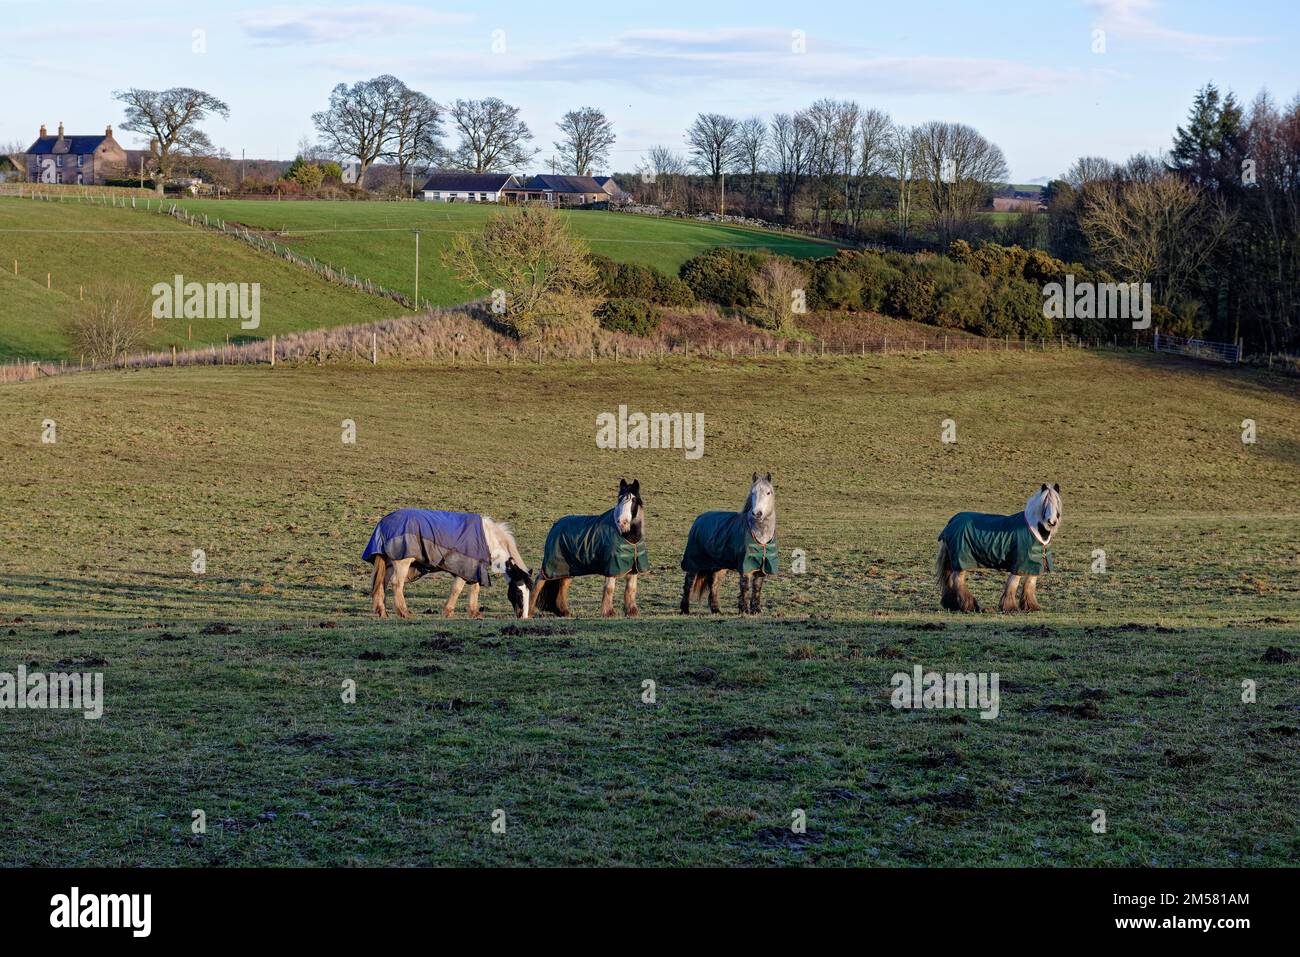 Four Horses with Horse Blankets to keep out the cold grazing in Fields close to Leysmill, overlooked by a Farmhouse and Farm Bungalow. Stock Photo